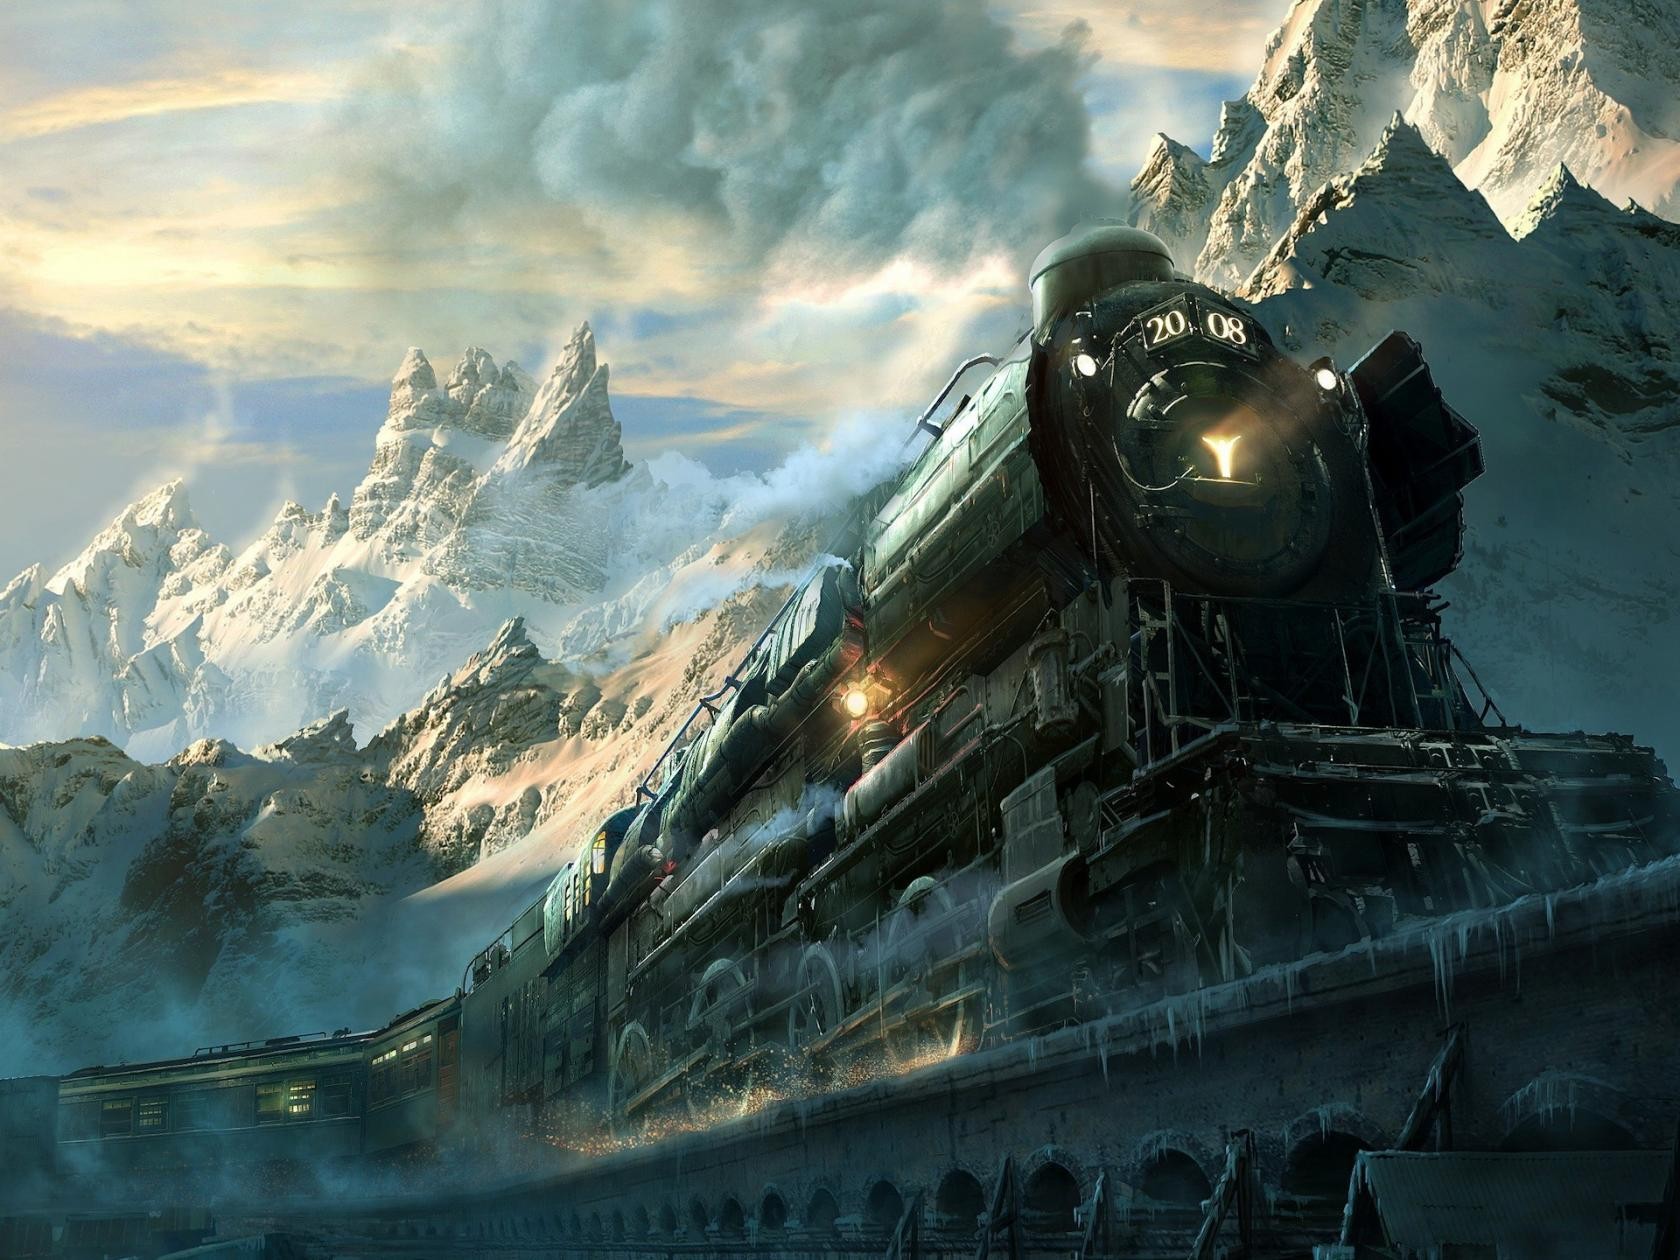 General 1680x1260 train mountains steam locomotive artwork numbers winter ice